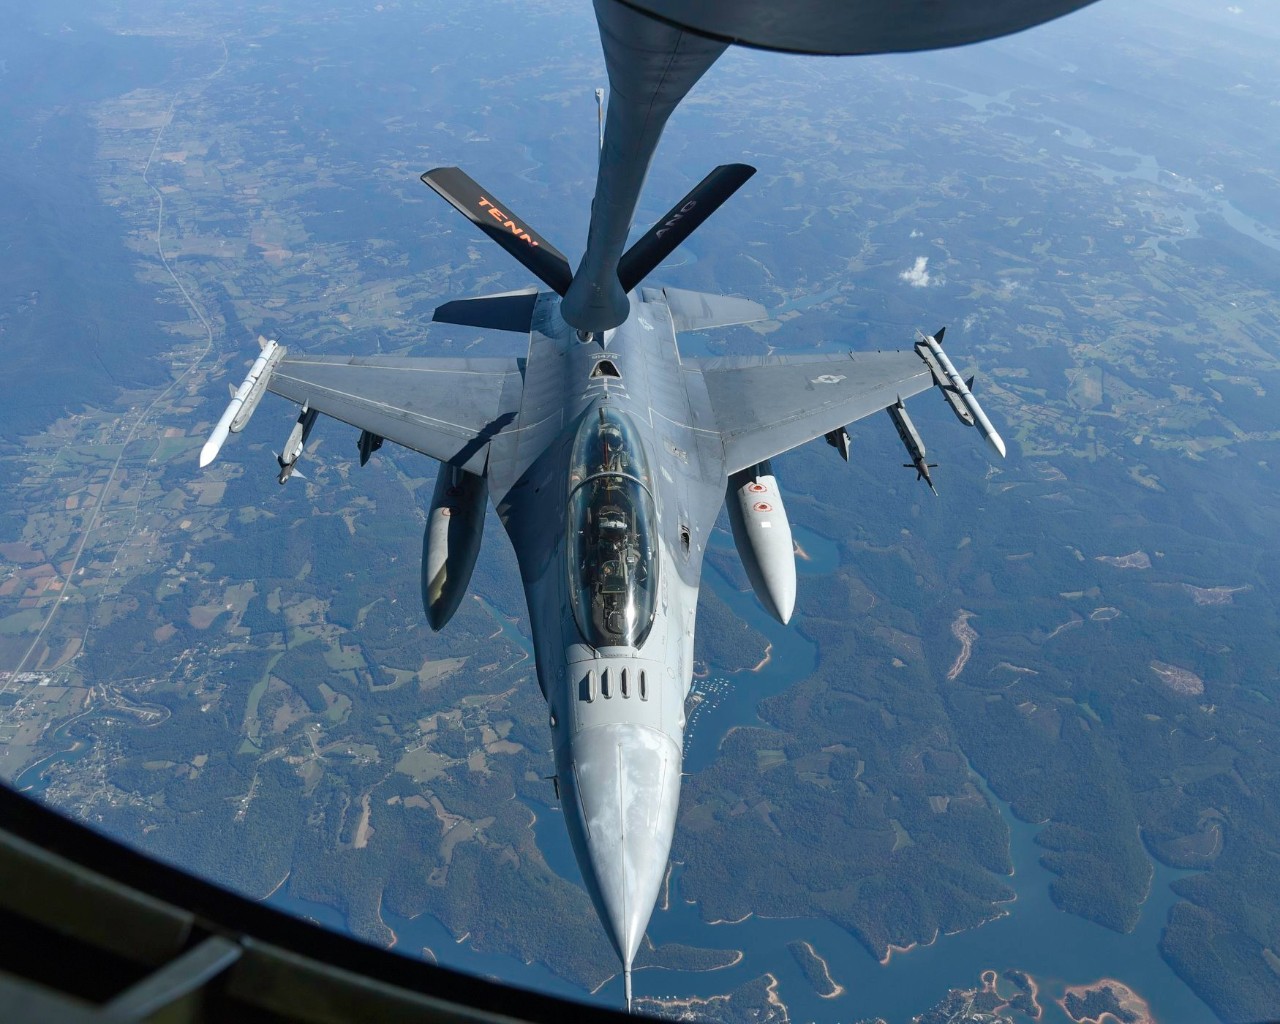 An Air National Guard KC-135 Stratotanker from the 134th Air Refueling Wing refuels a South Carolina Air National Guard F-16 Fighting Falcon while military officials from Bulgarian watch from onboard. (Photo courtesy of the Tennessee National Guard)